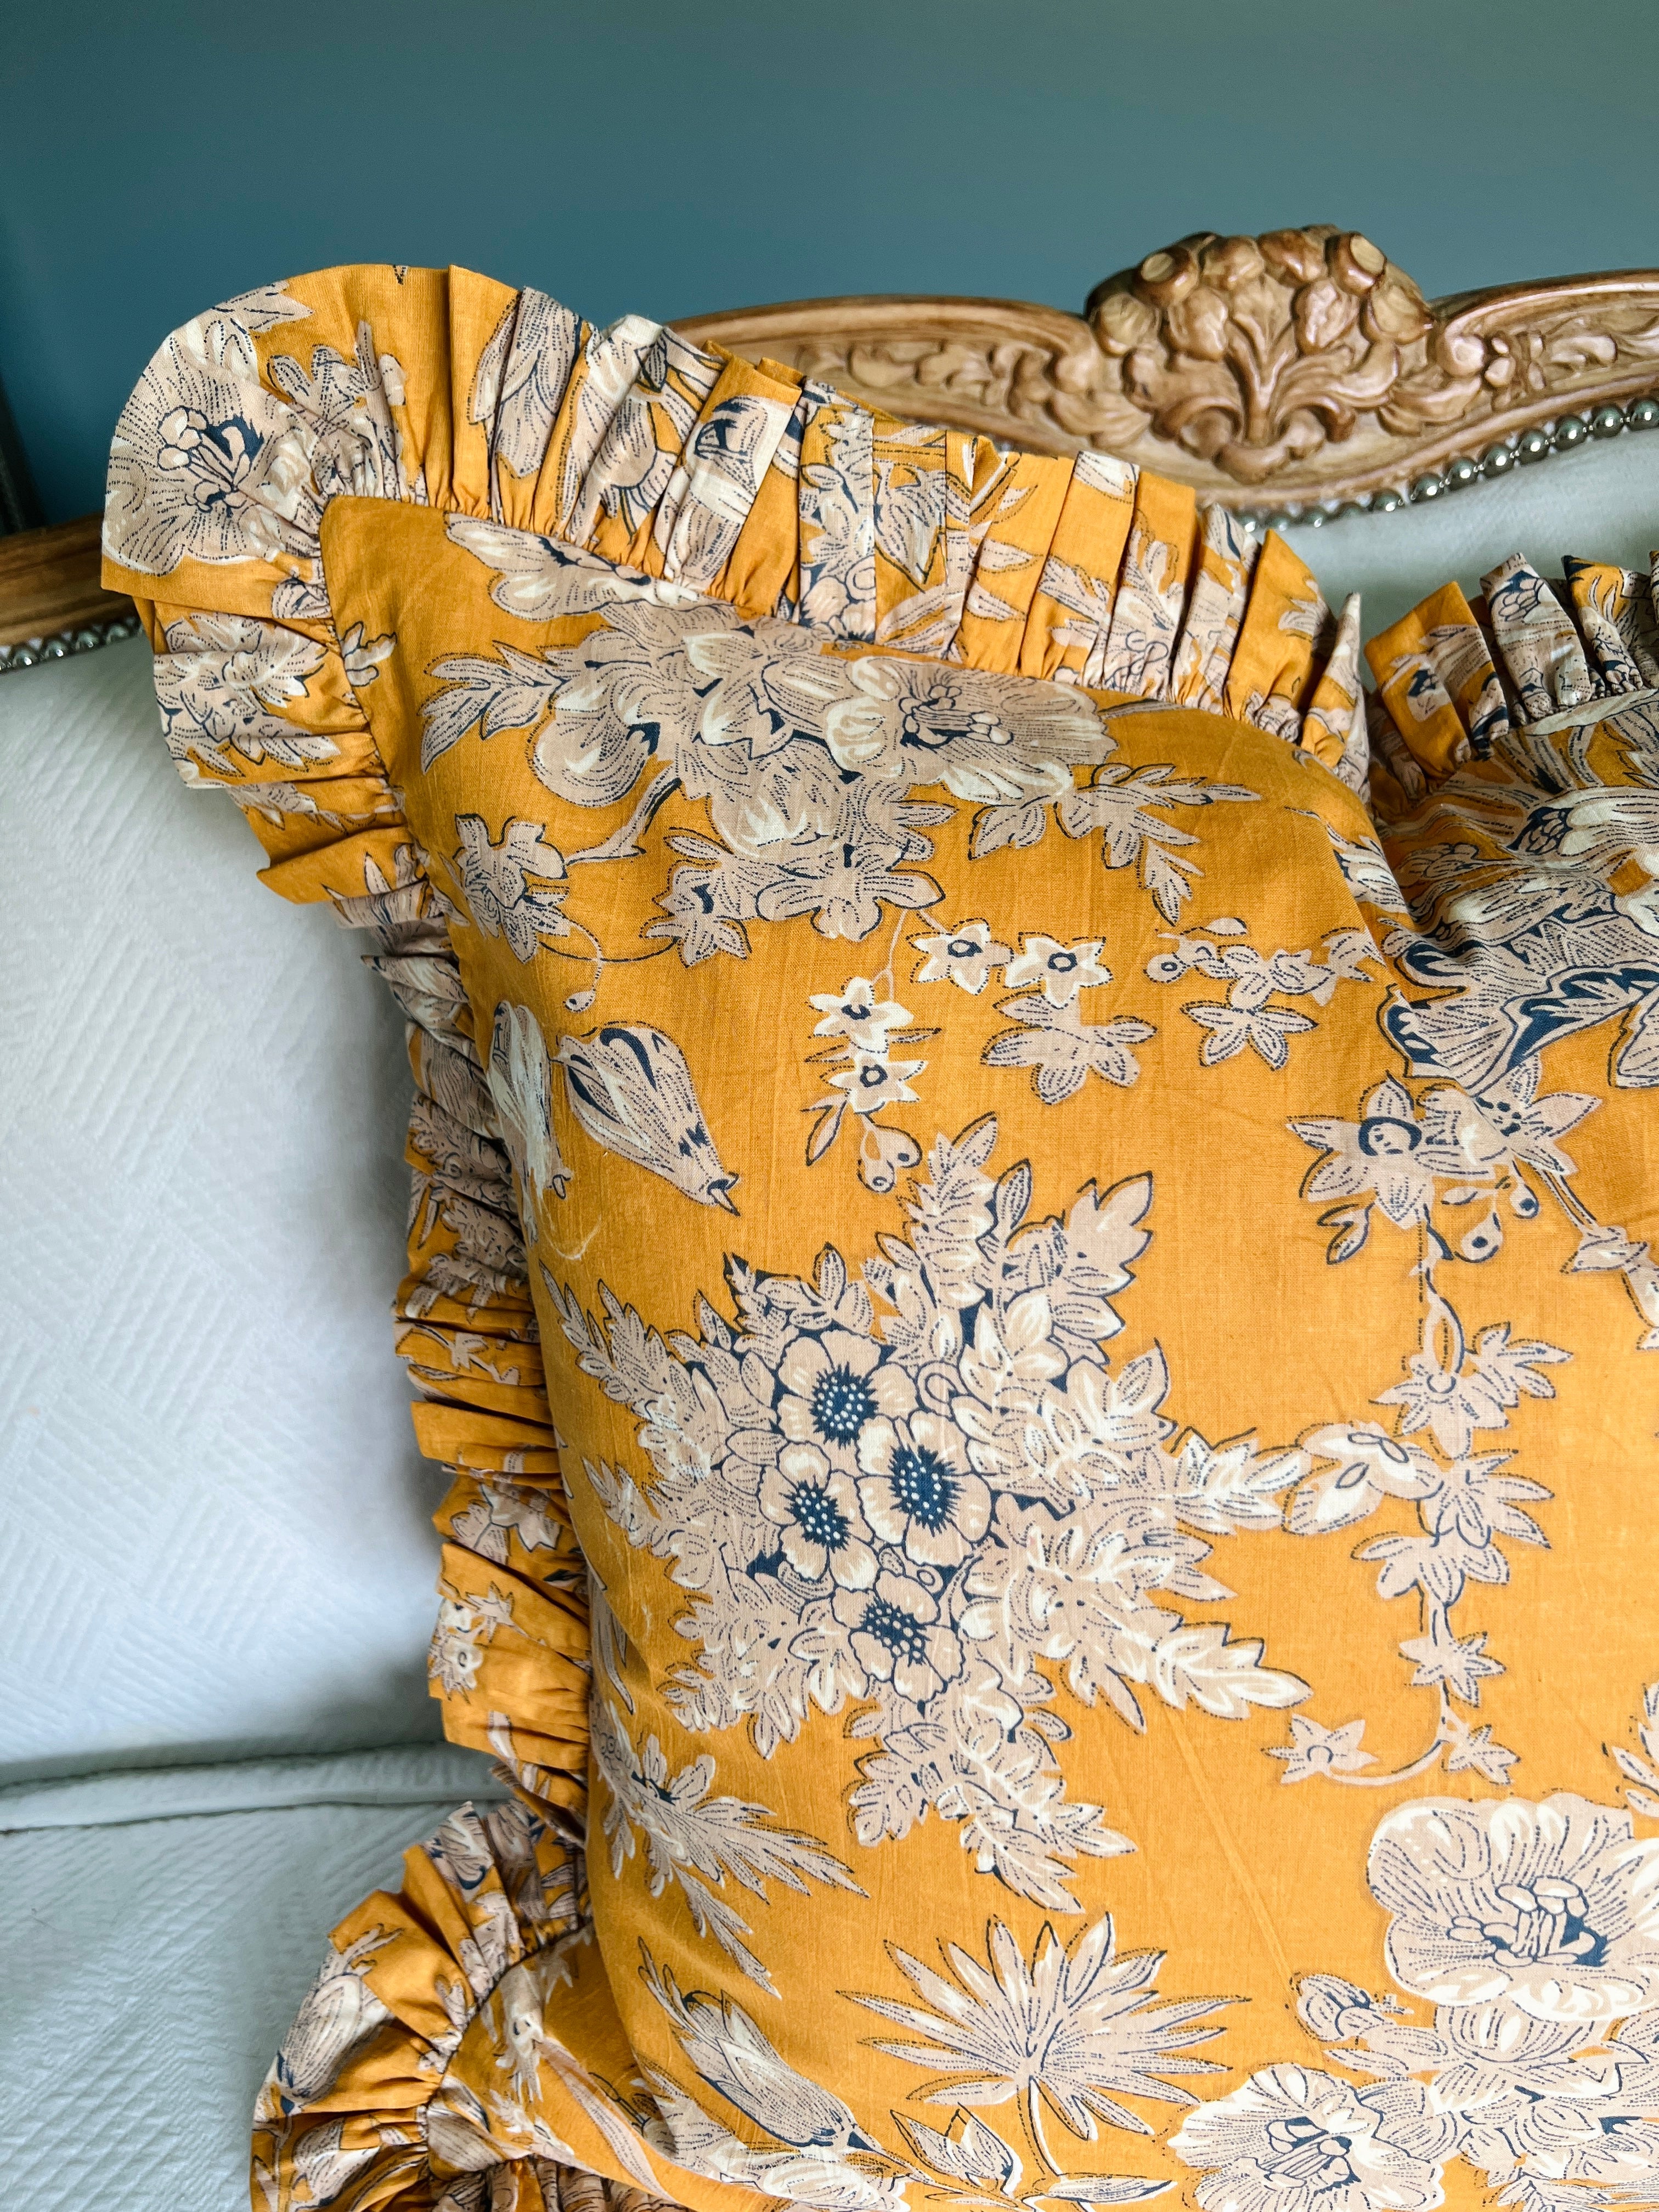 Mustard yellow floral toile pillow cover with ruffle trim